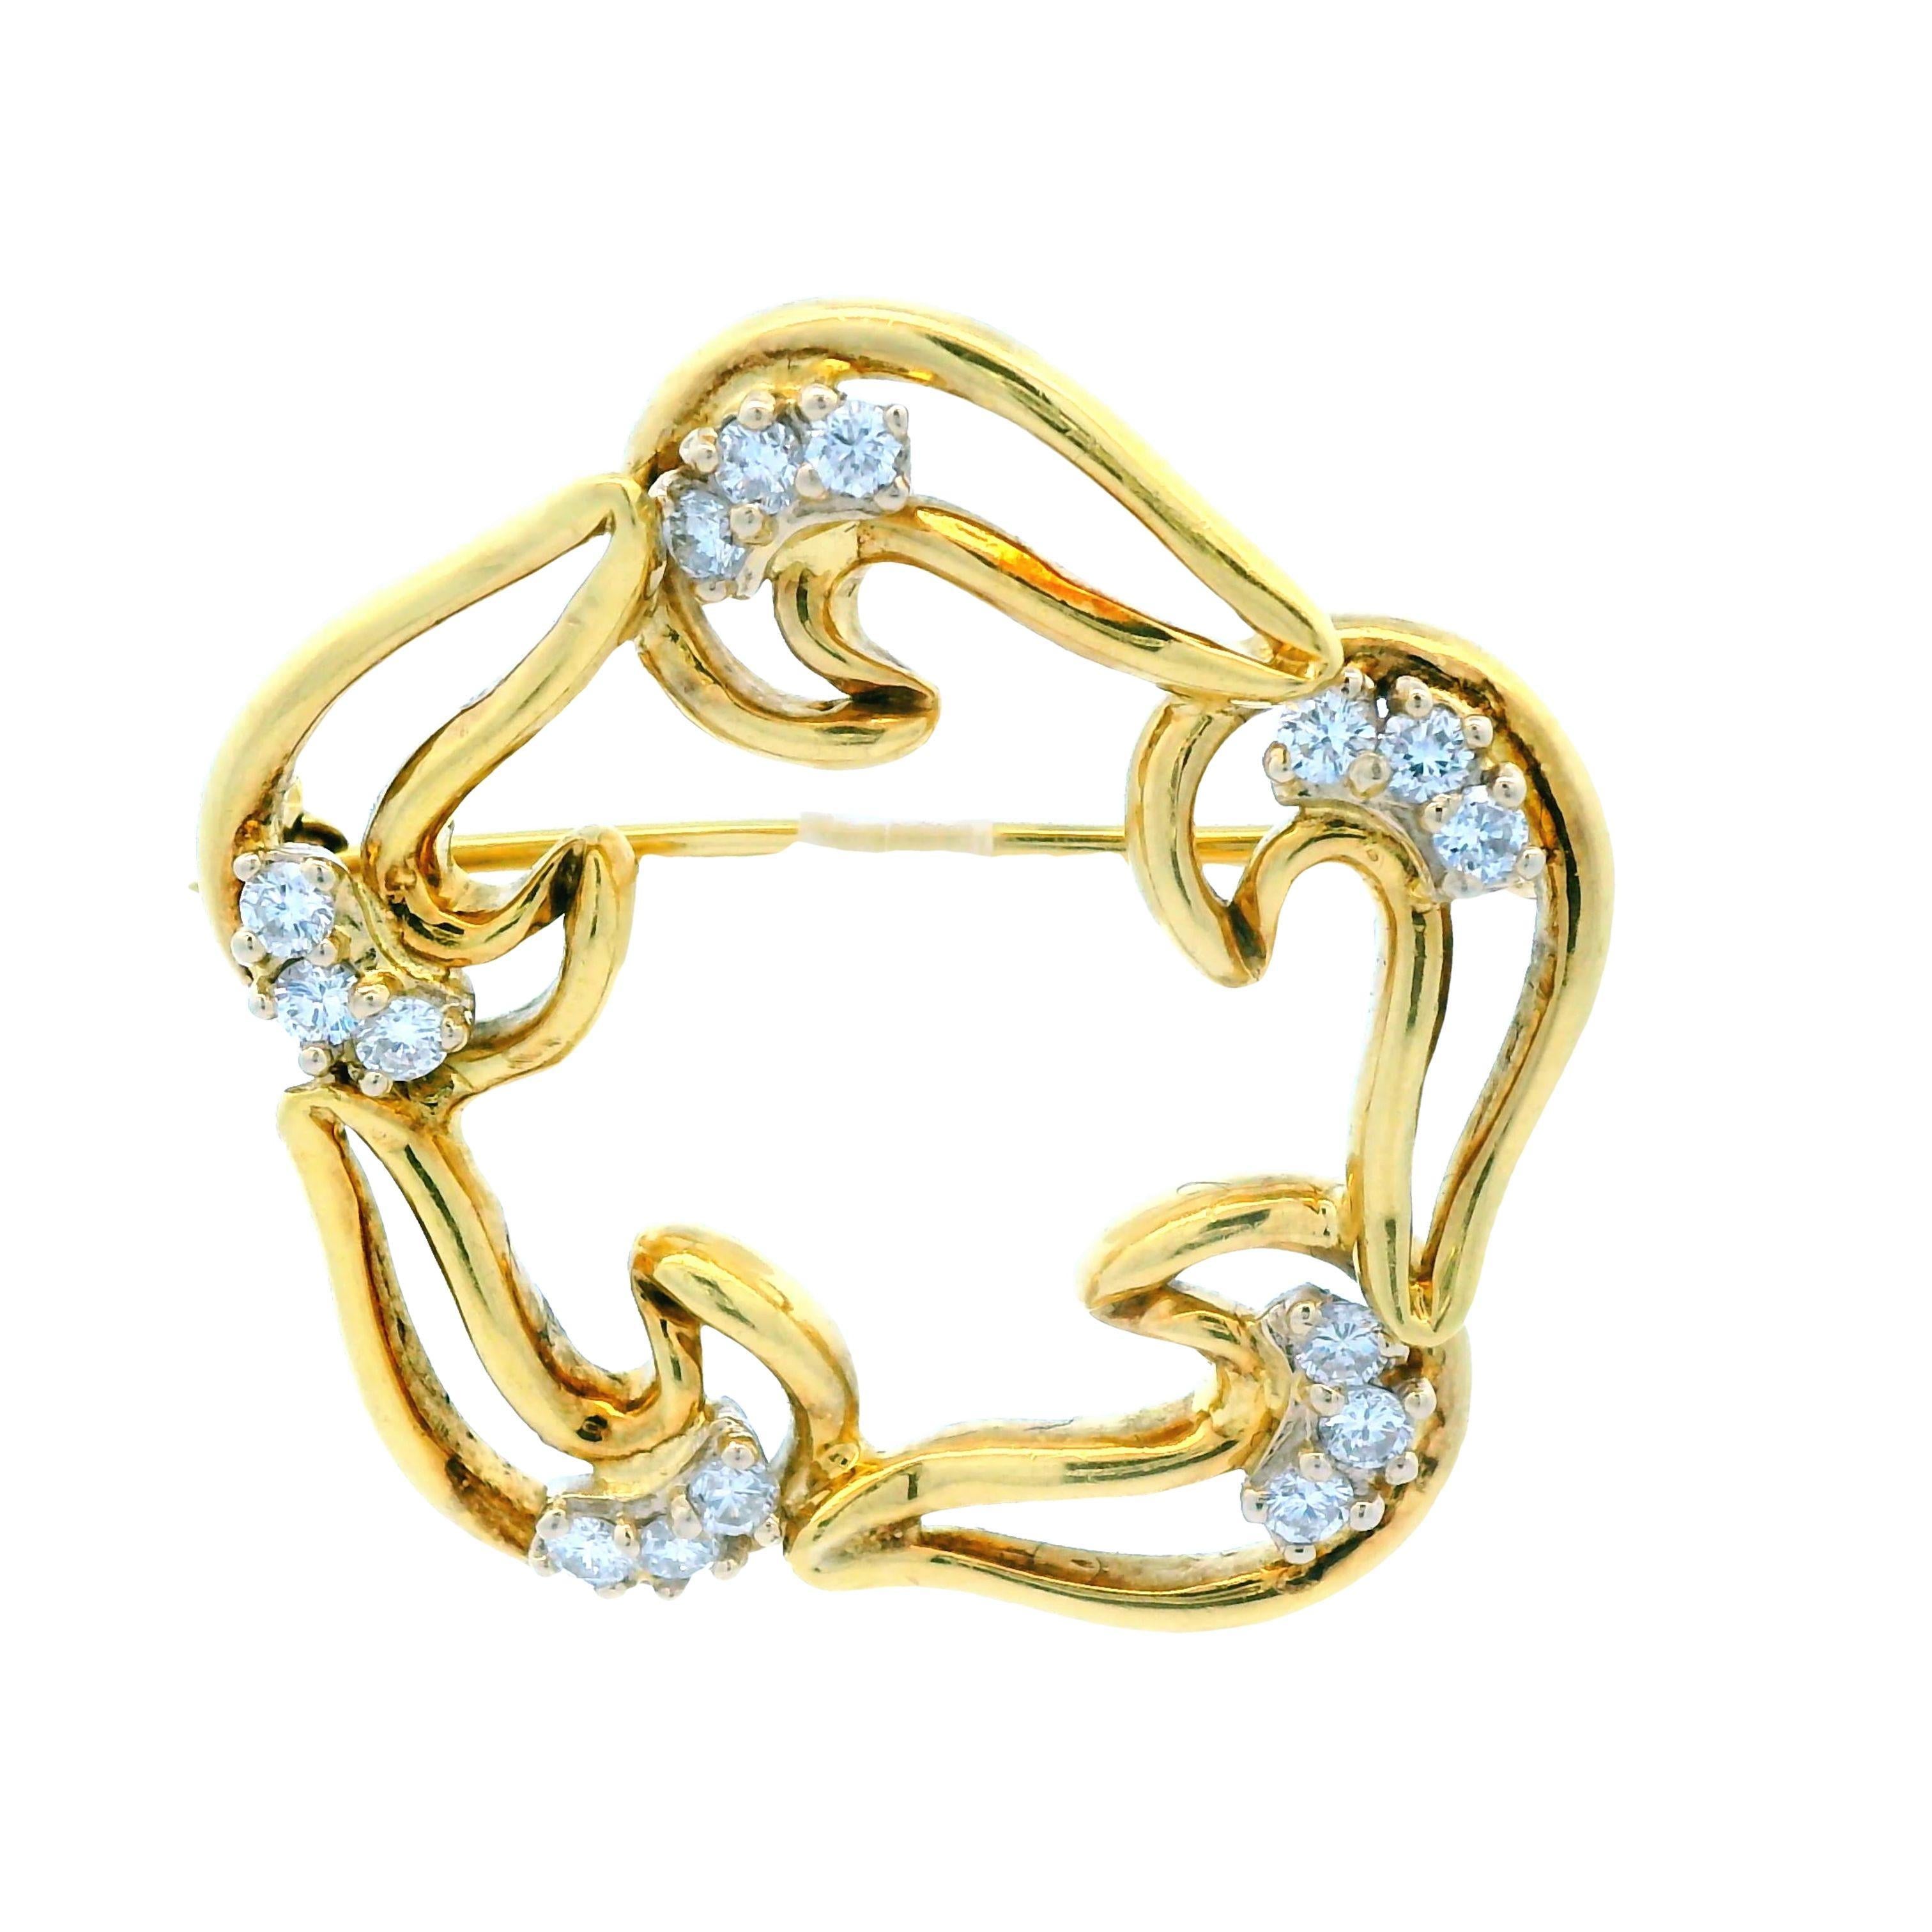 This is a lovely 18k yellow gold and diamond pin from the 1960s.  Although this pin utilizes negative space and appears to be light and airy, this pin is solid and dense. This pin can be worn and styled in many different ways due to its unique,